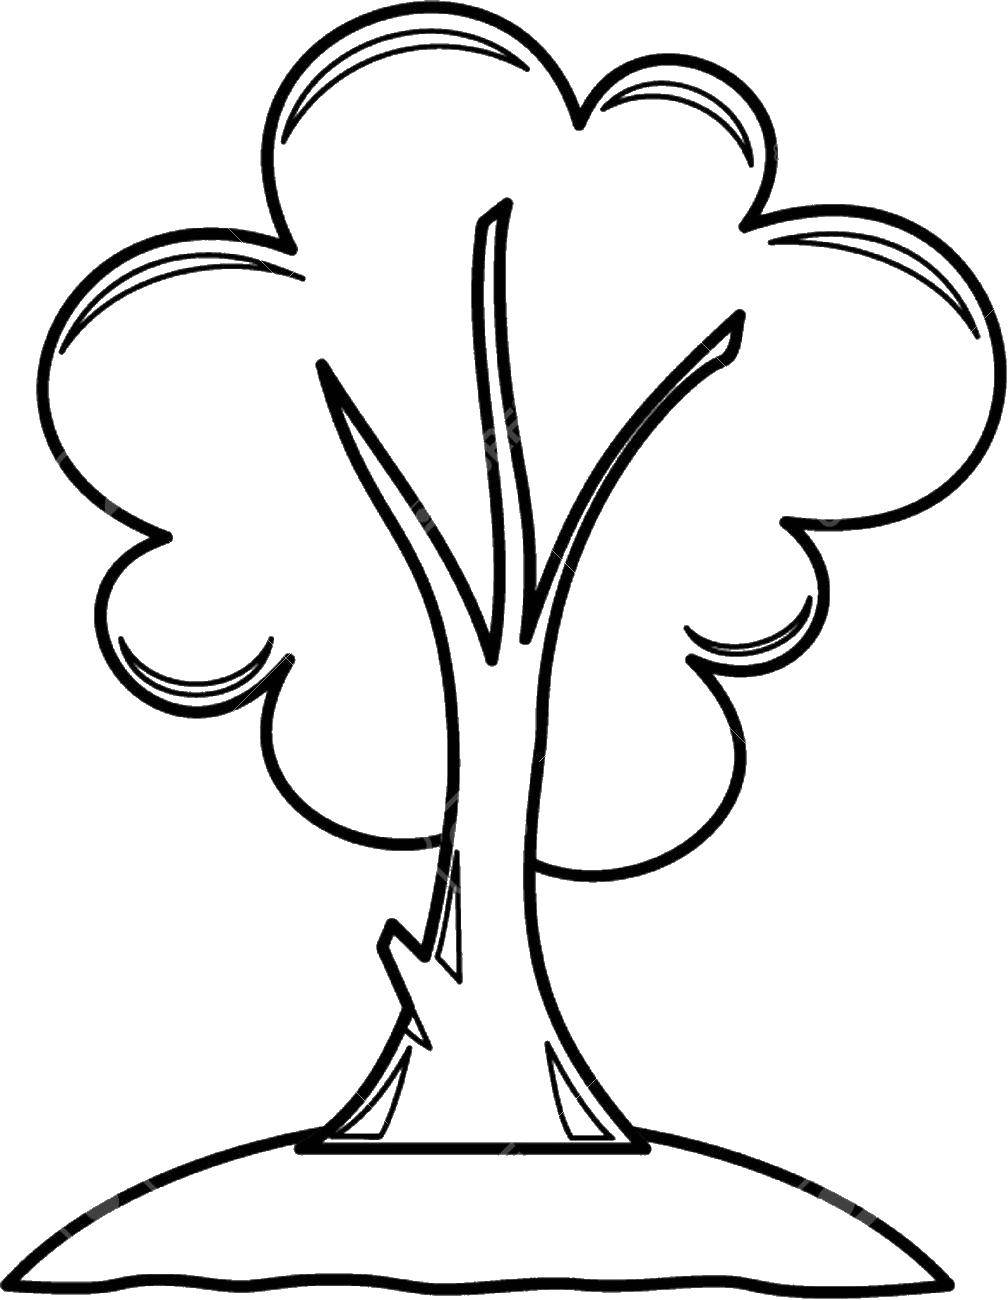 Coloring Tree. Category The contour of the tree. Tags:  tree.